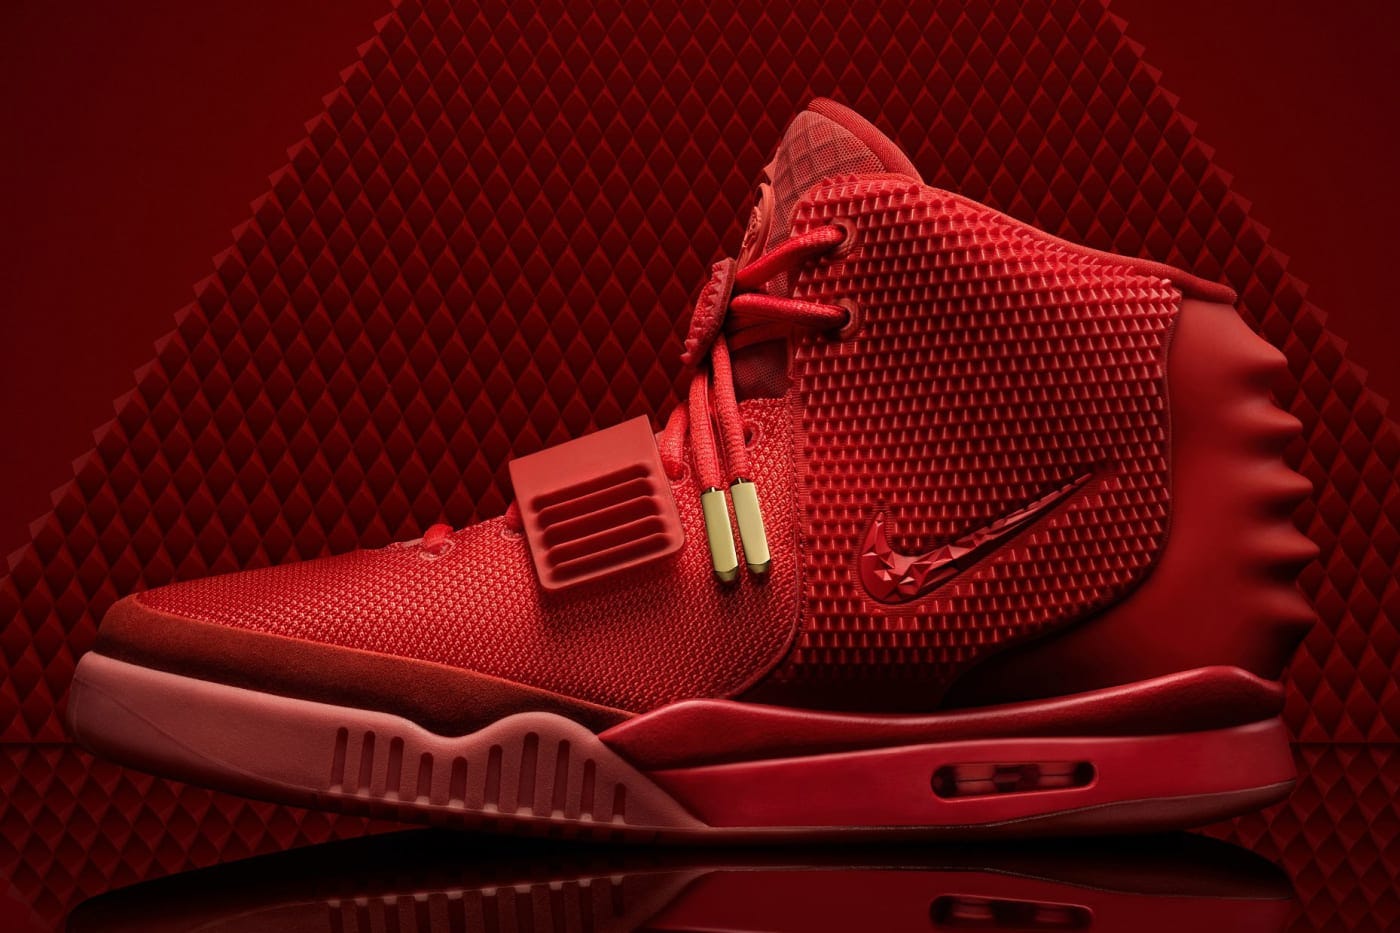 How the “Red October” Became The Most Talked About Sneakers Ever | Complex